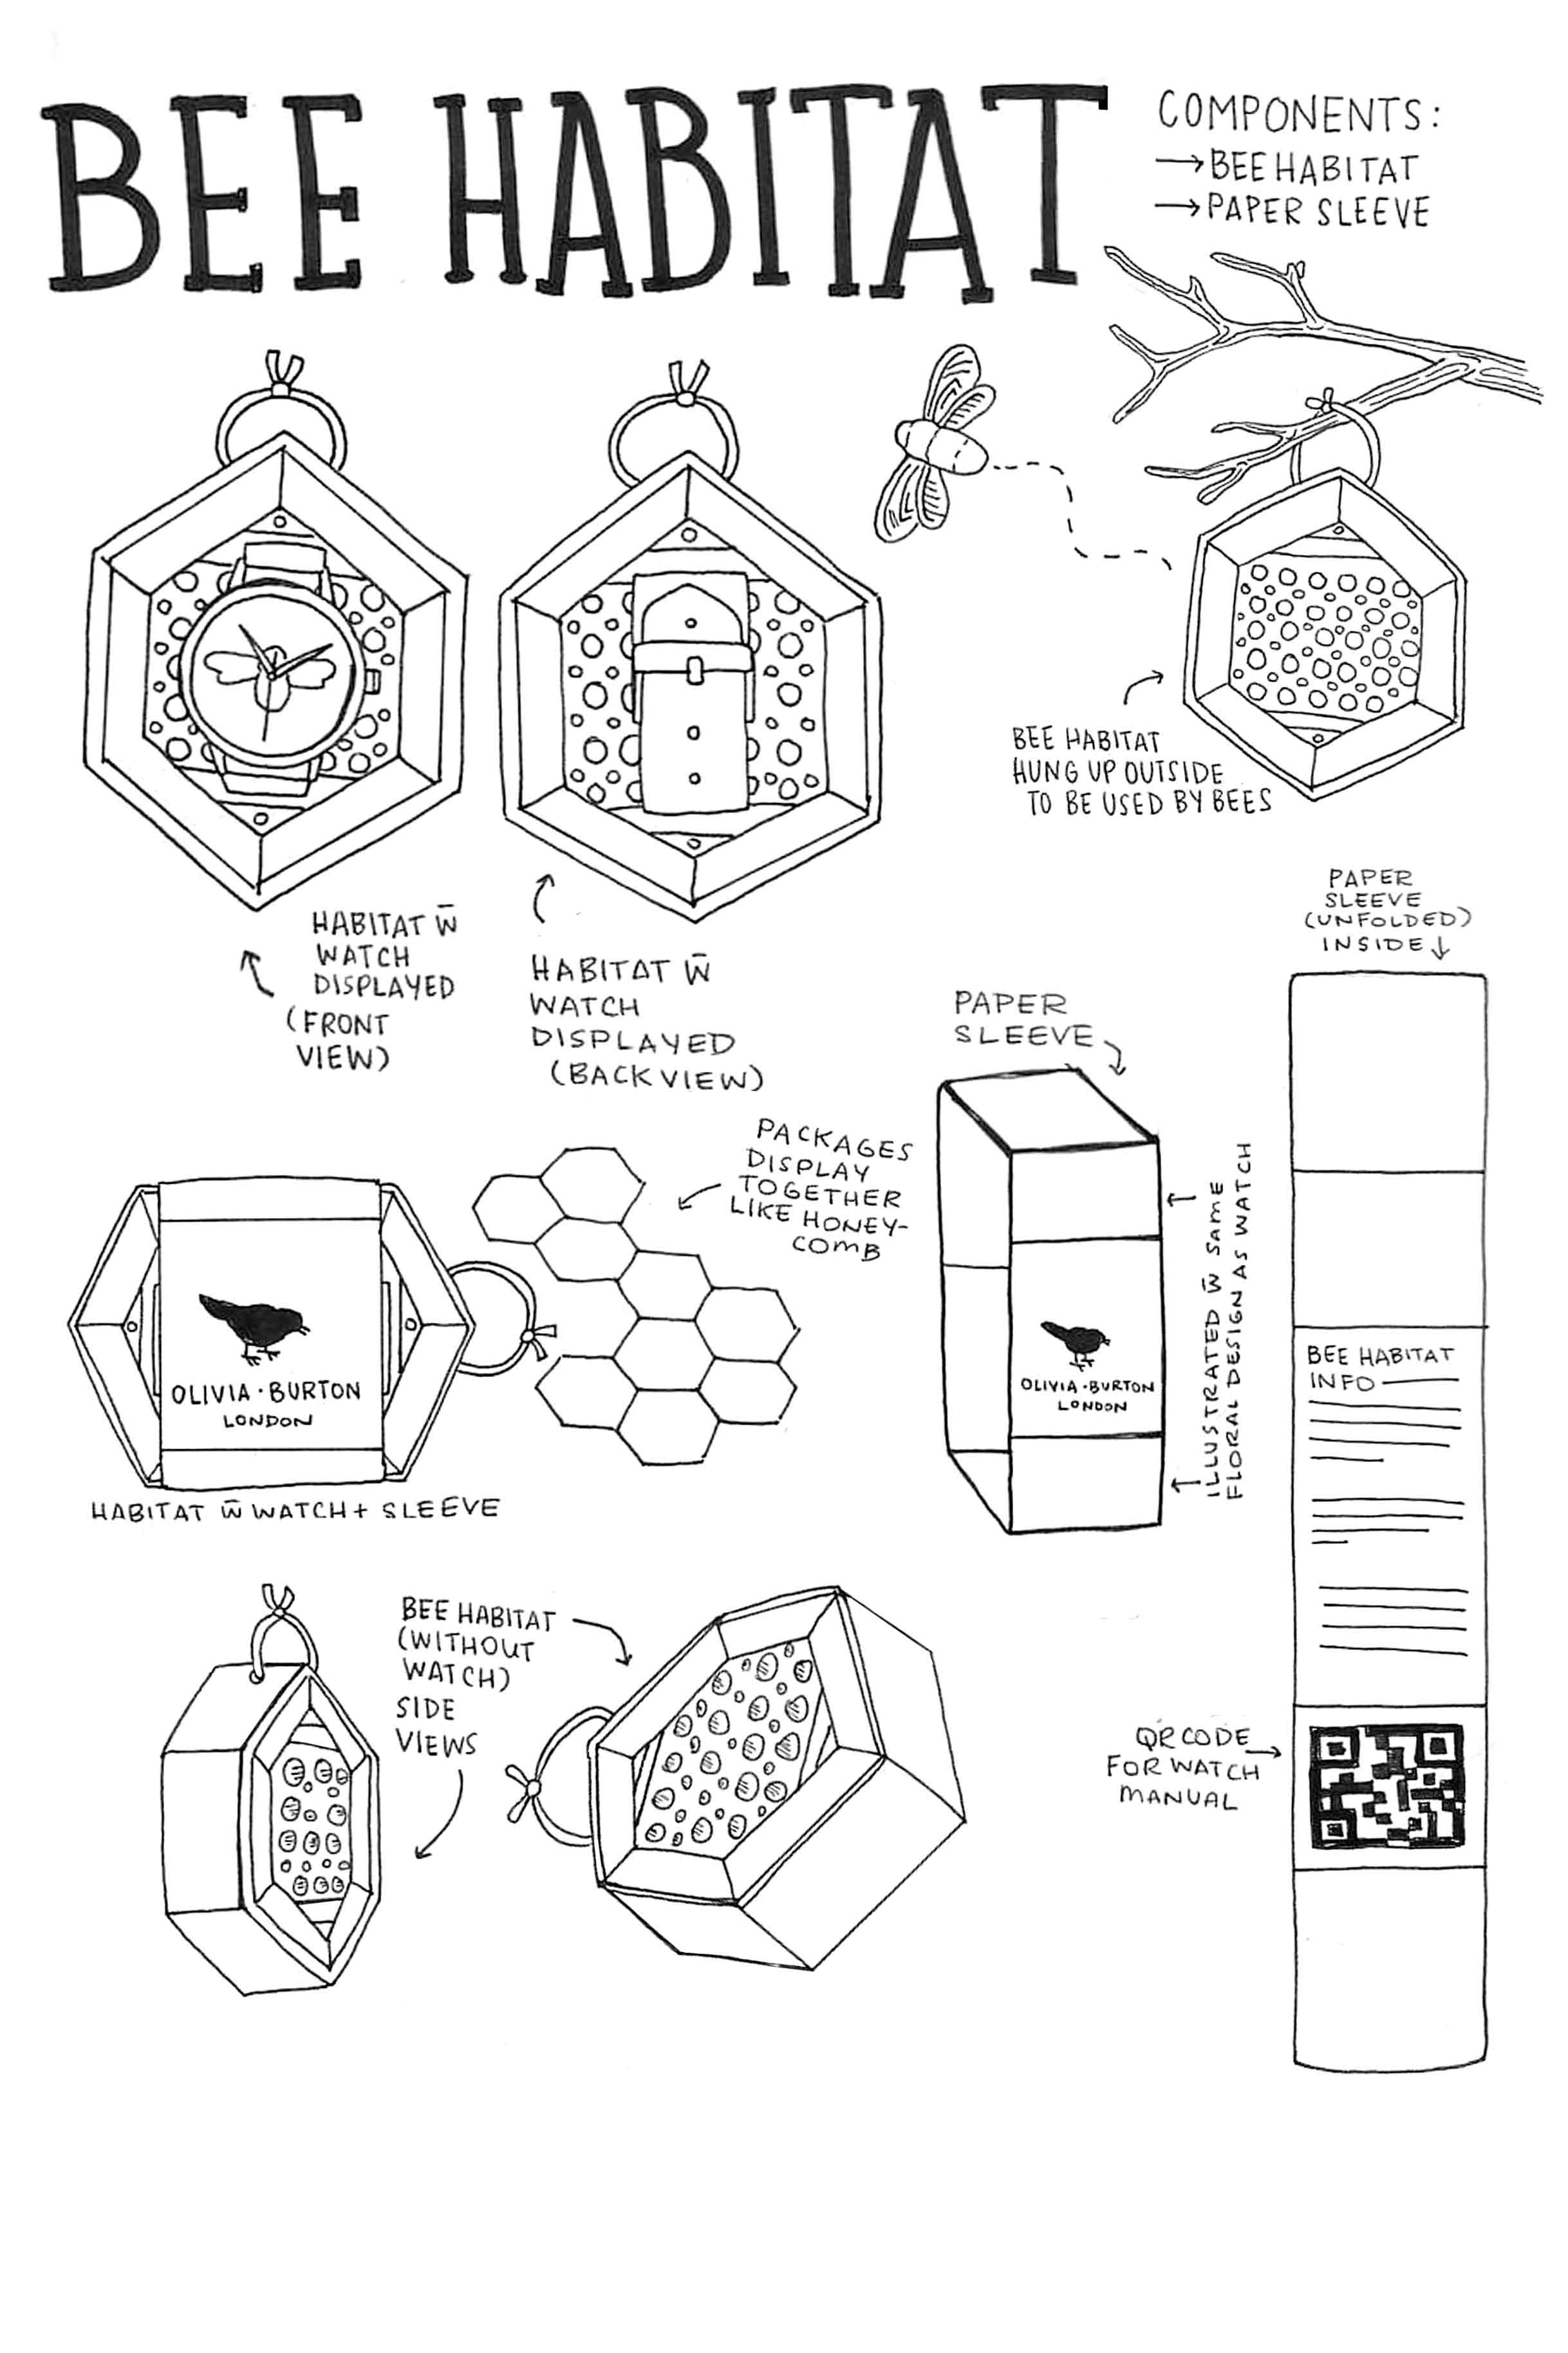 Image of the plans for the product packaging